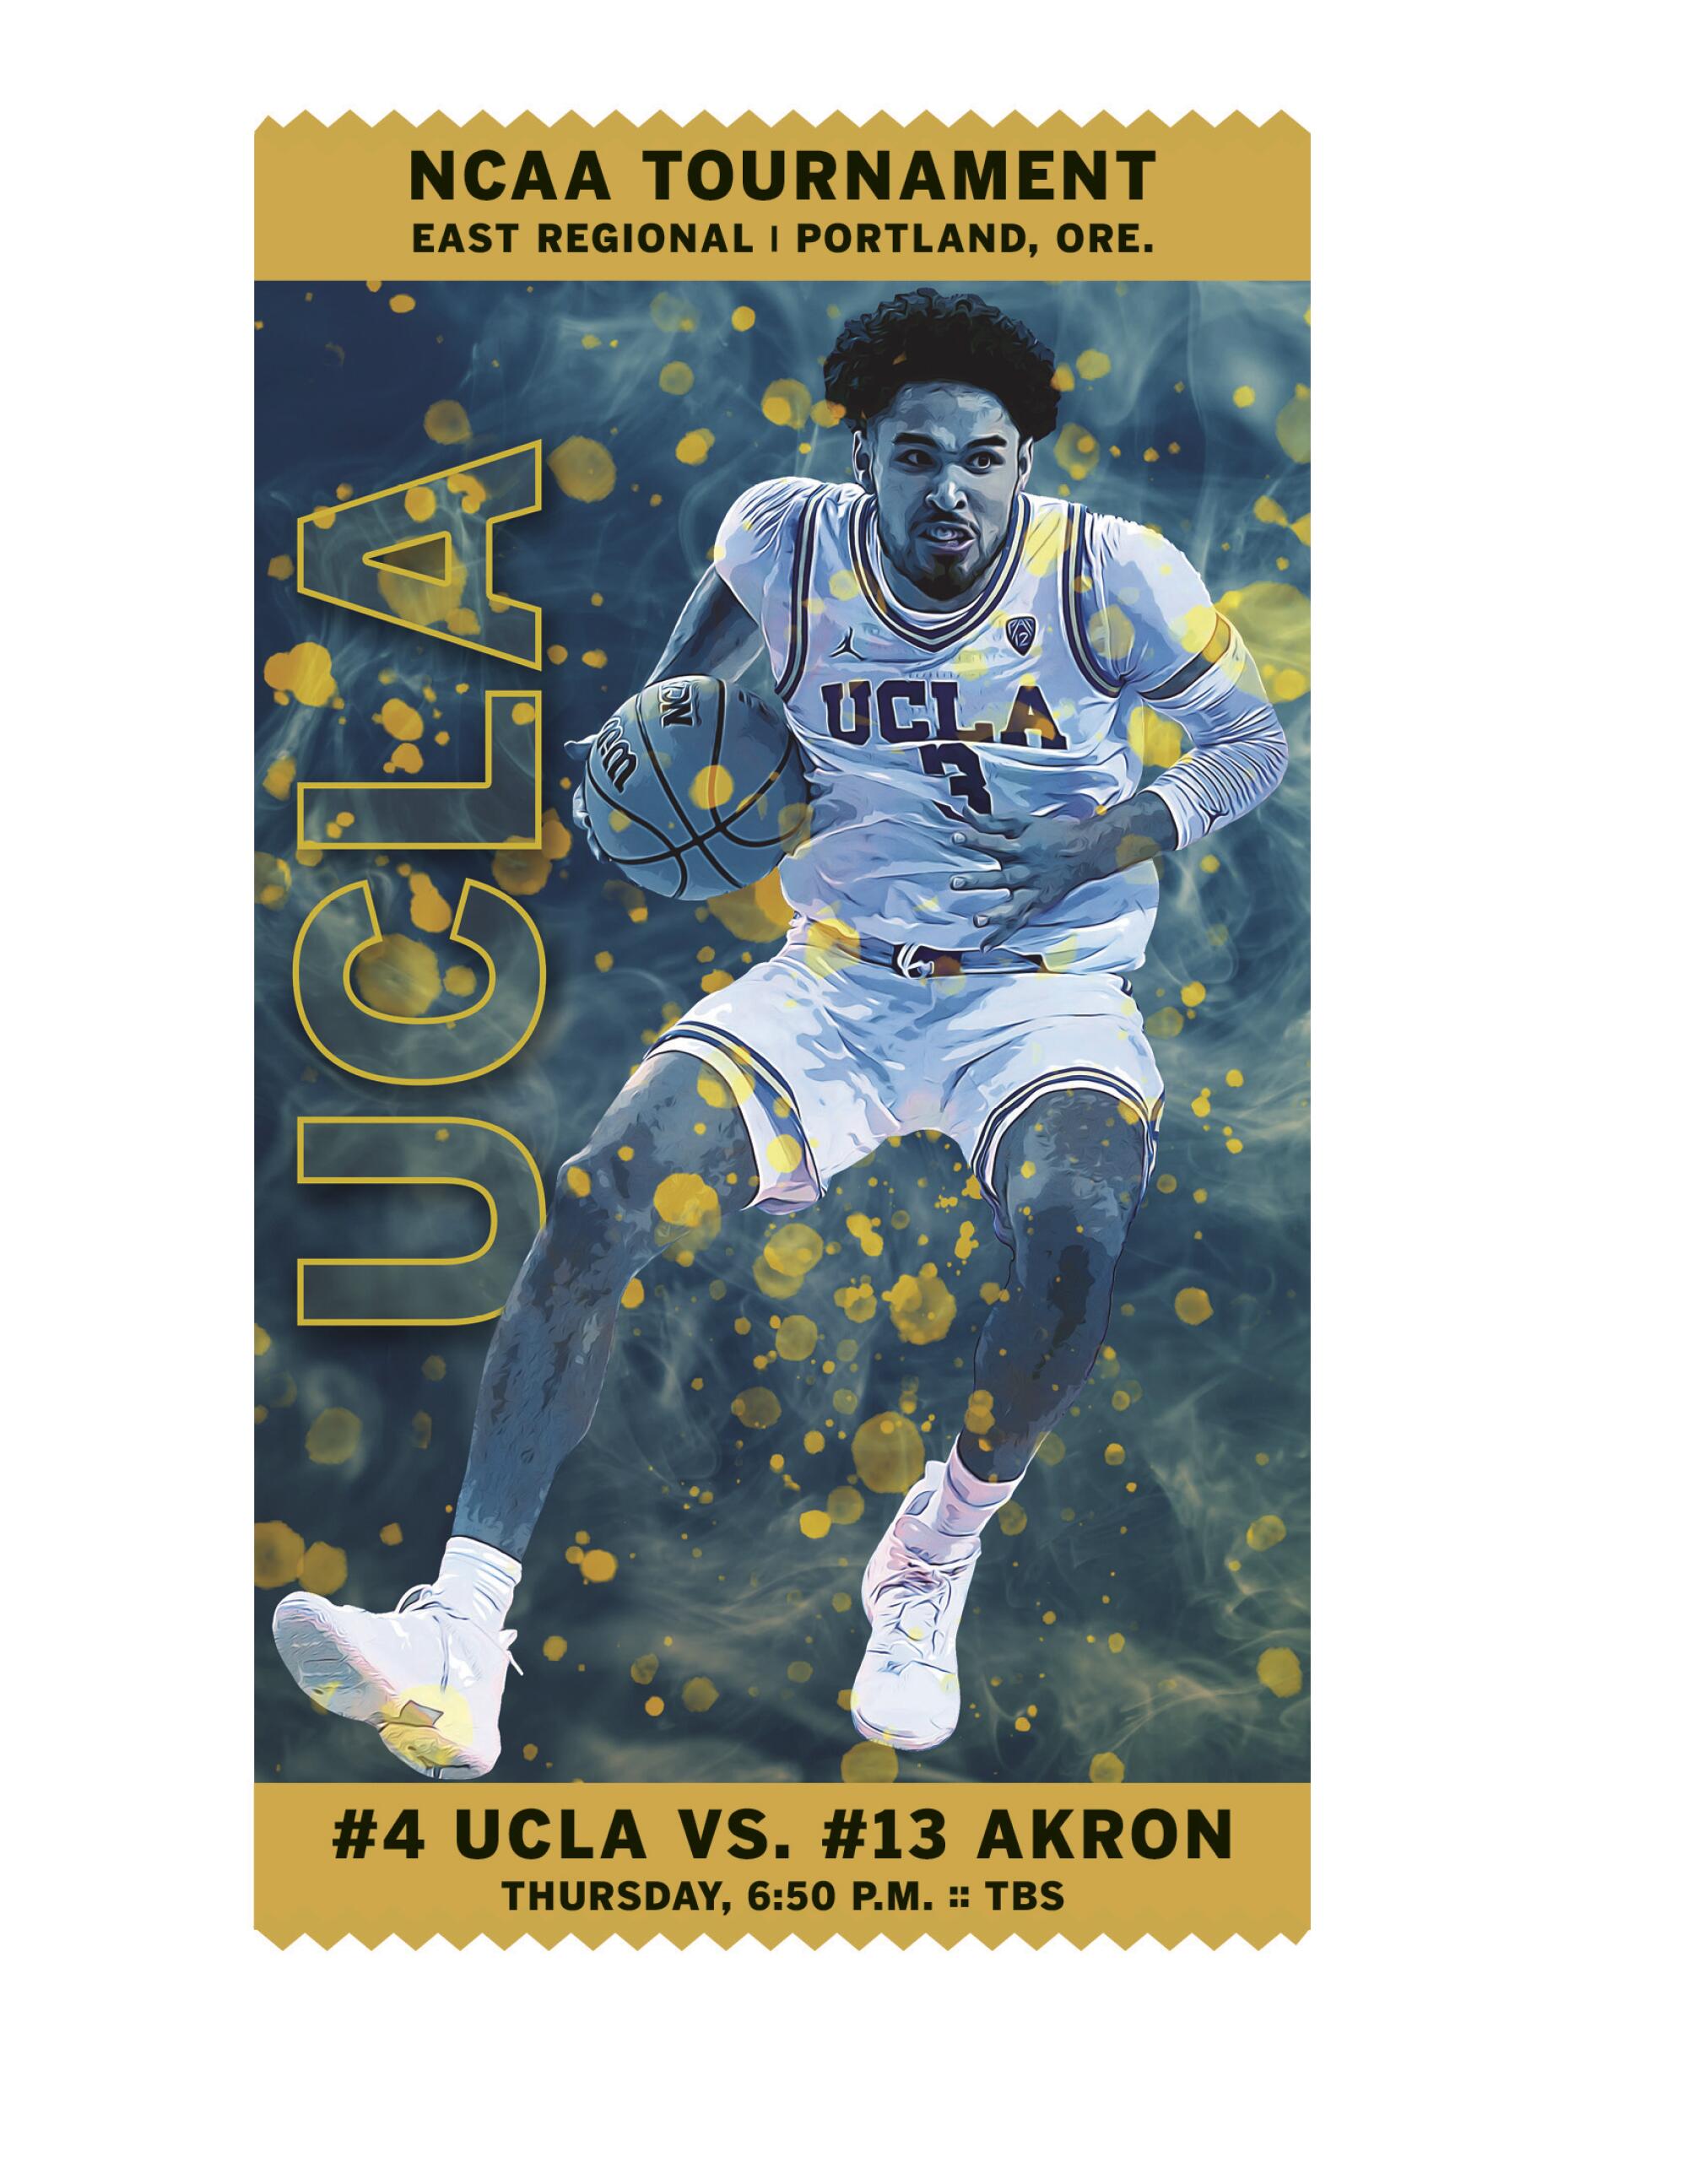 A UCLA basketball player is featured on a poster with information about its next game against Akron